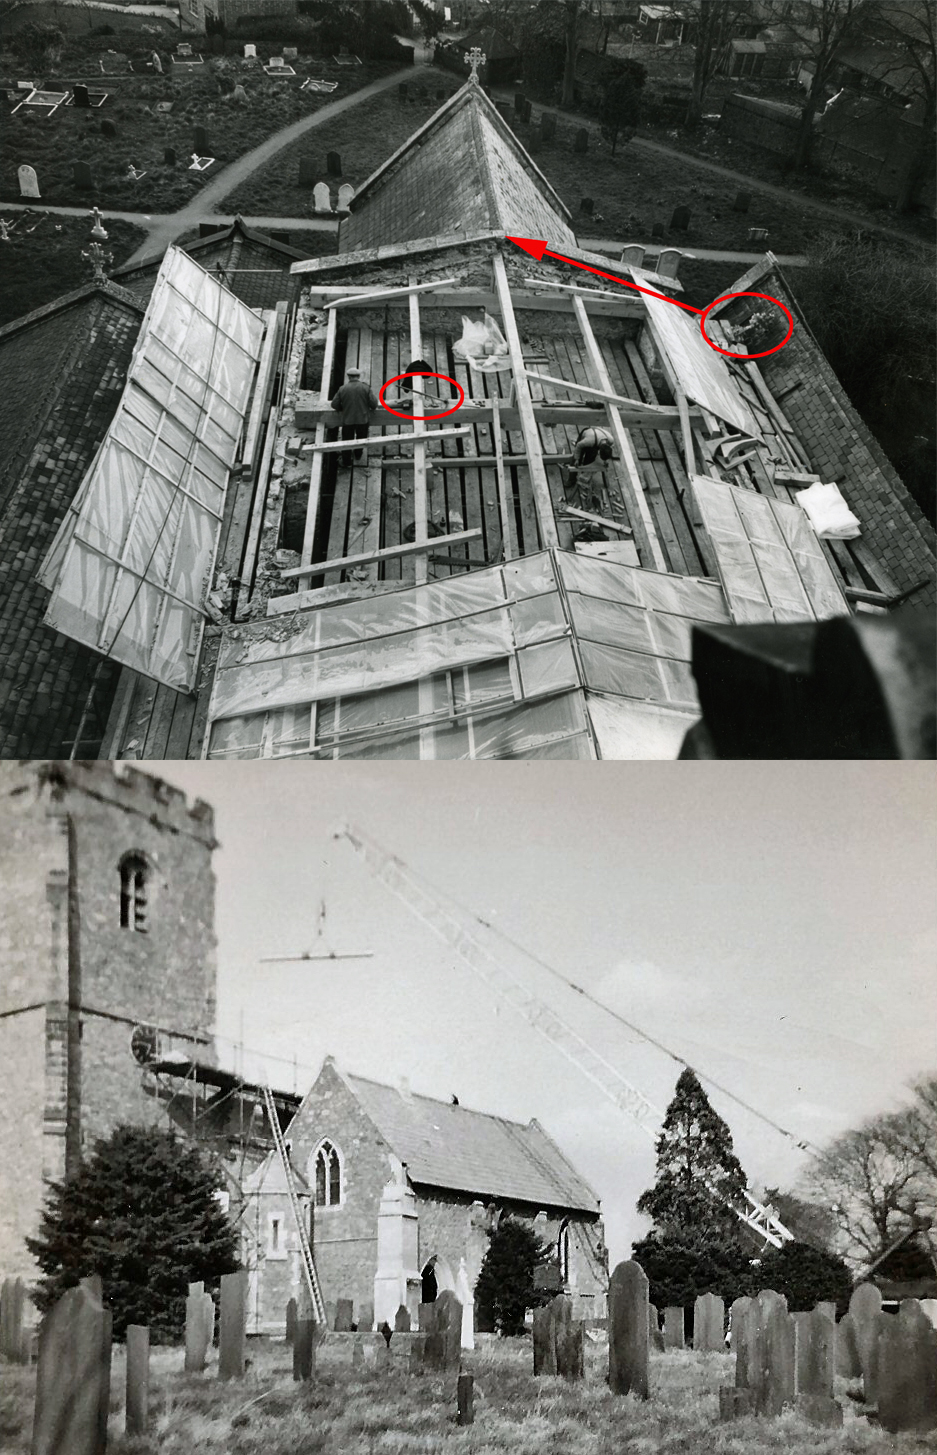 Replacing the Church roof after the Church fire in 1965